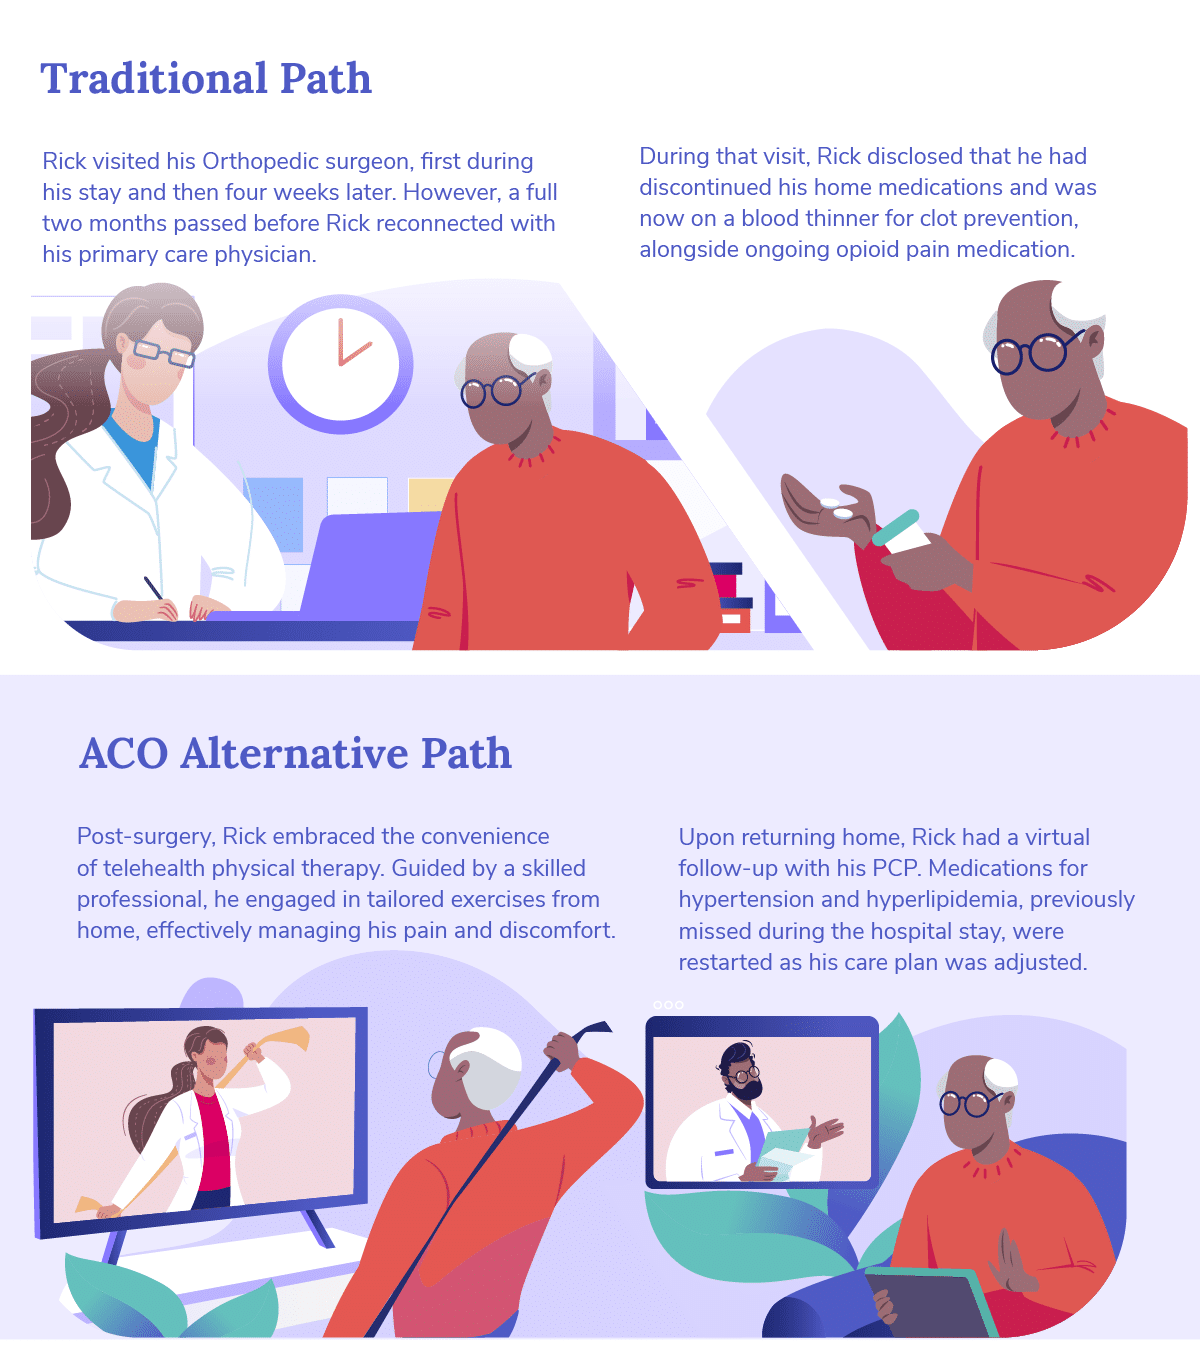 future-of-healthcare_patient-experience-traditional-vs-aco-03